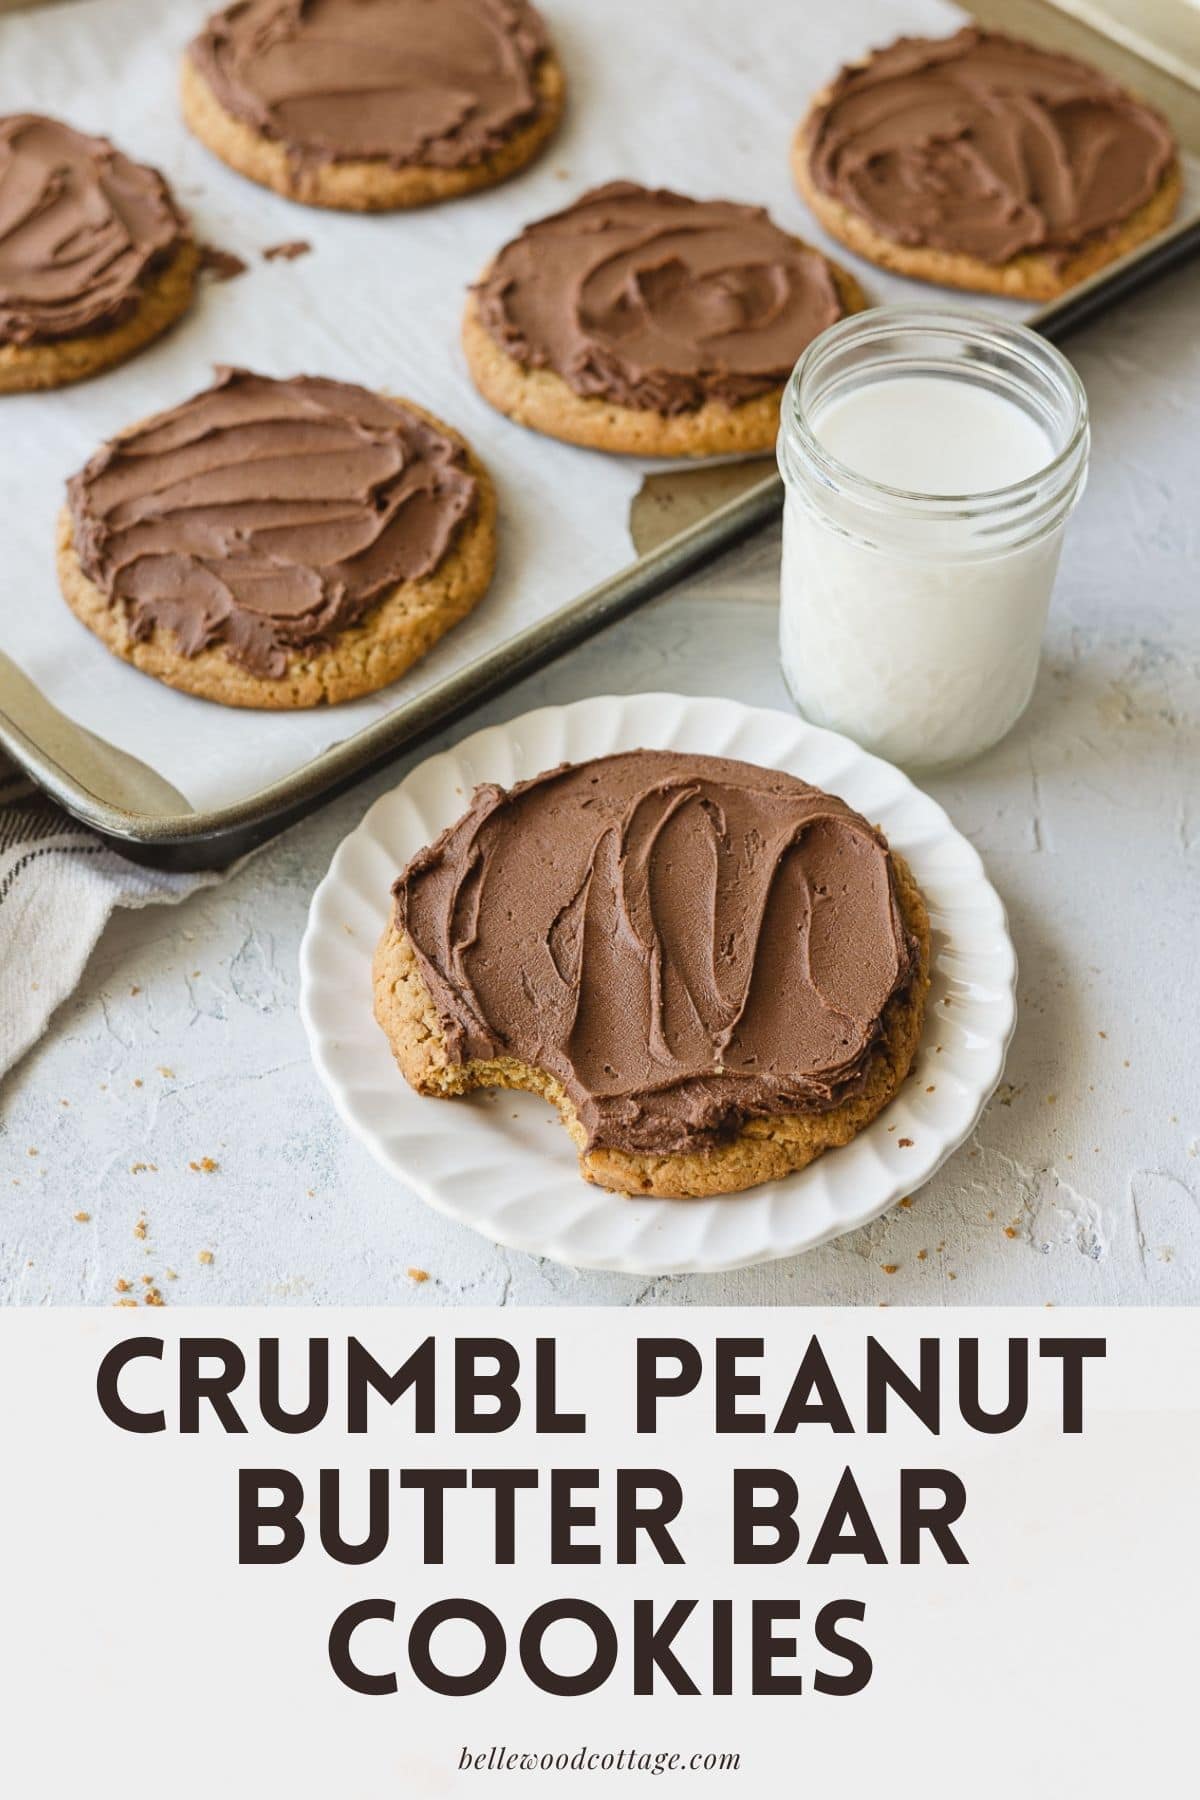 Frosted chocolate peanut butter cookies with the words, "Crumbl Peanut Butter Bar Cookies."